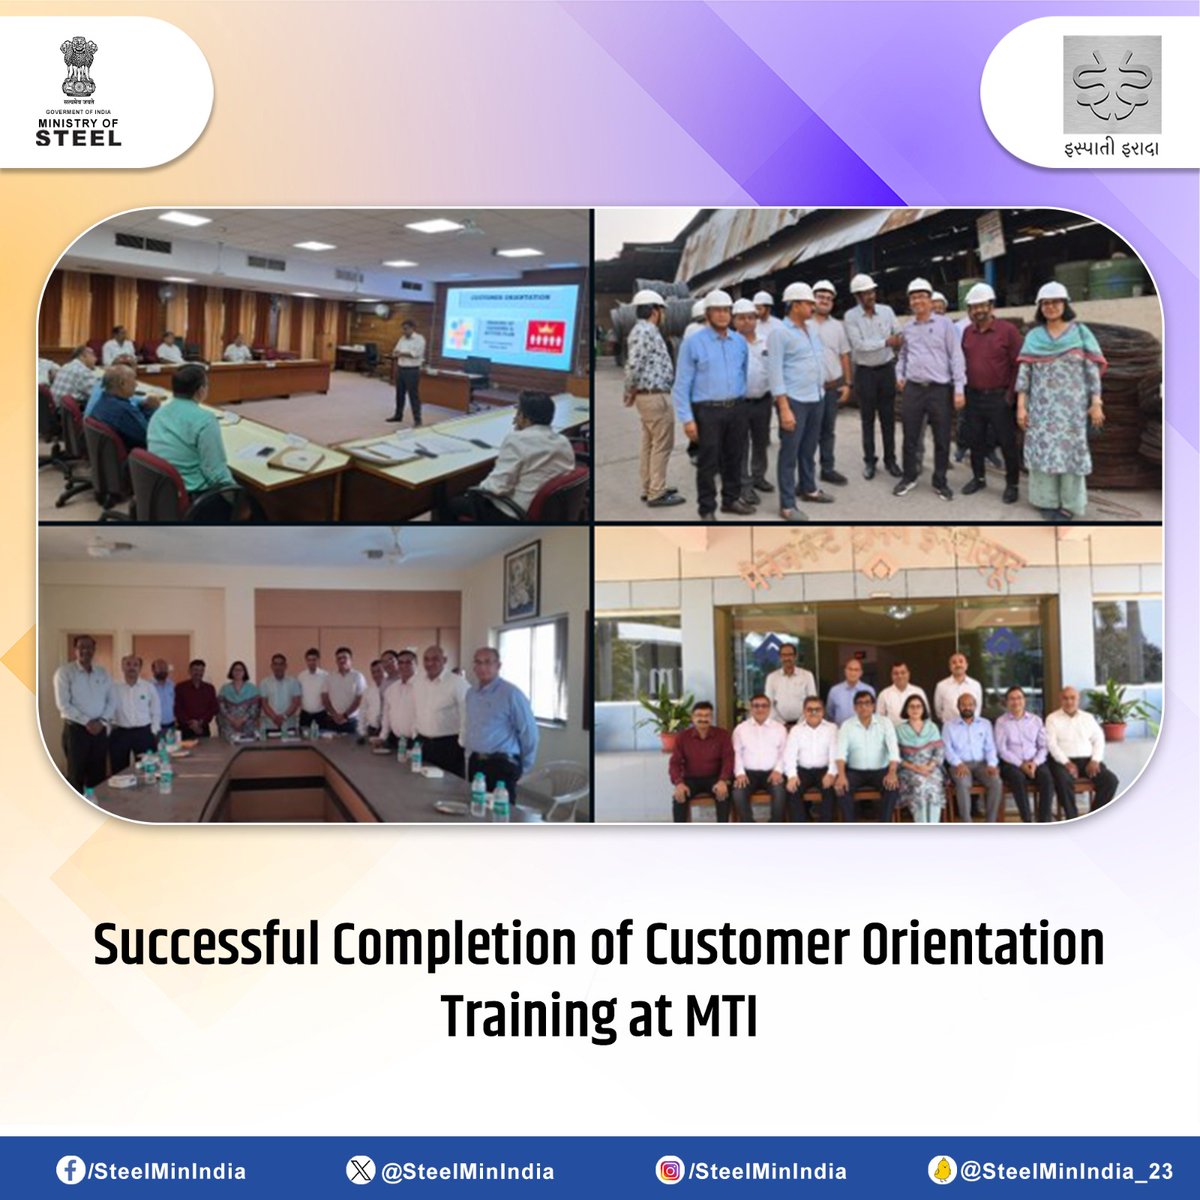 The Customer Orientation training at MTI concluded on May 15, equipping GMs with essential insights for fostering a Customer-Centric Organization. The training included a discussion that provided a deeper understanding of customer needs and expectations. #SAIL #SAILranchi